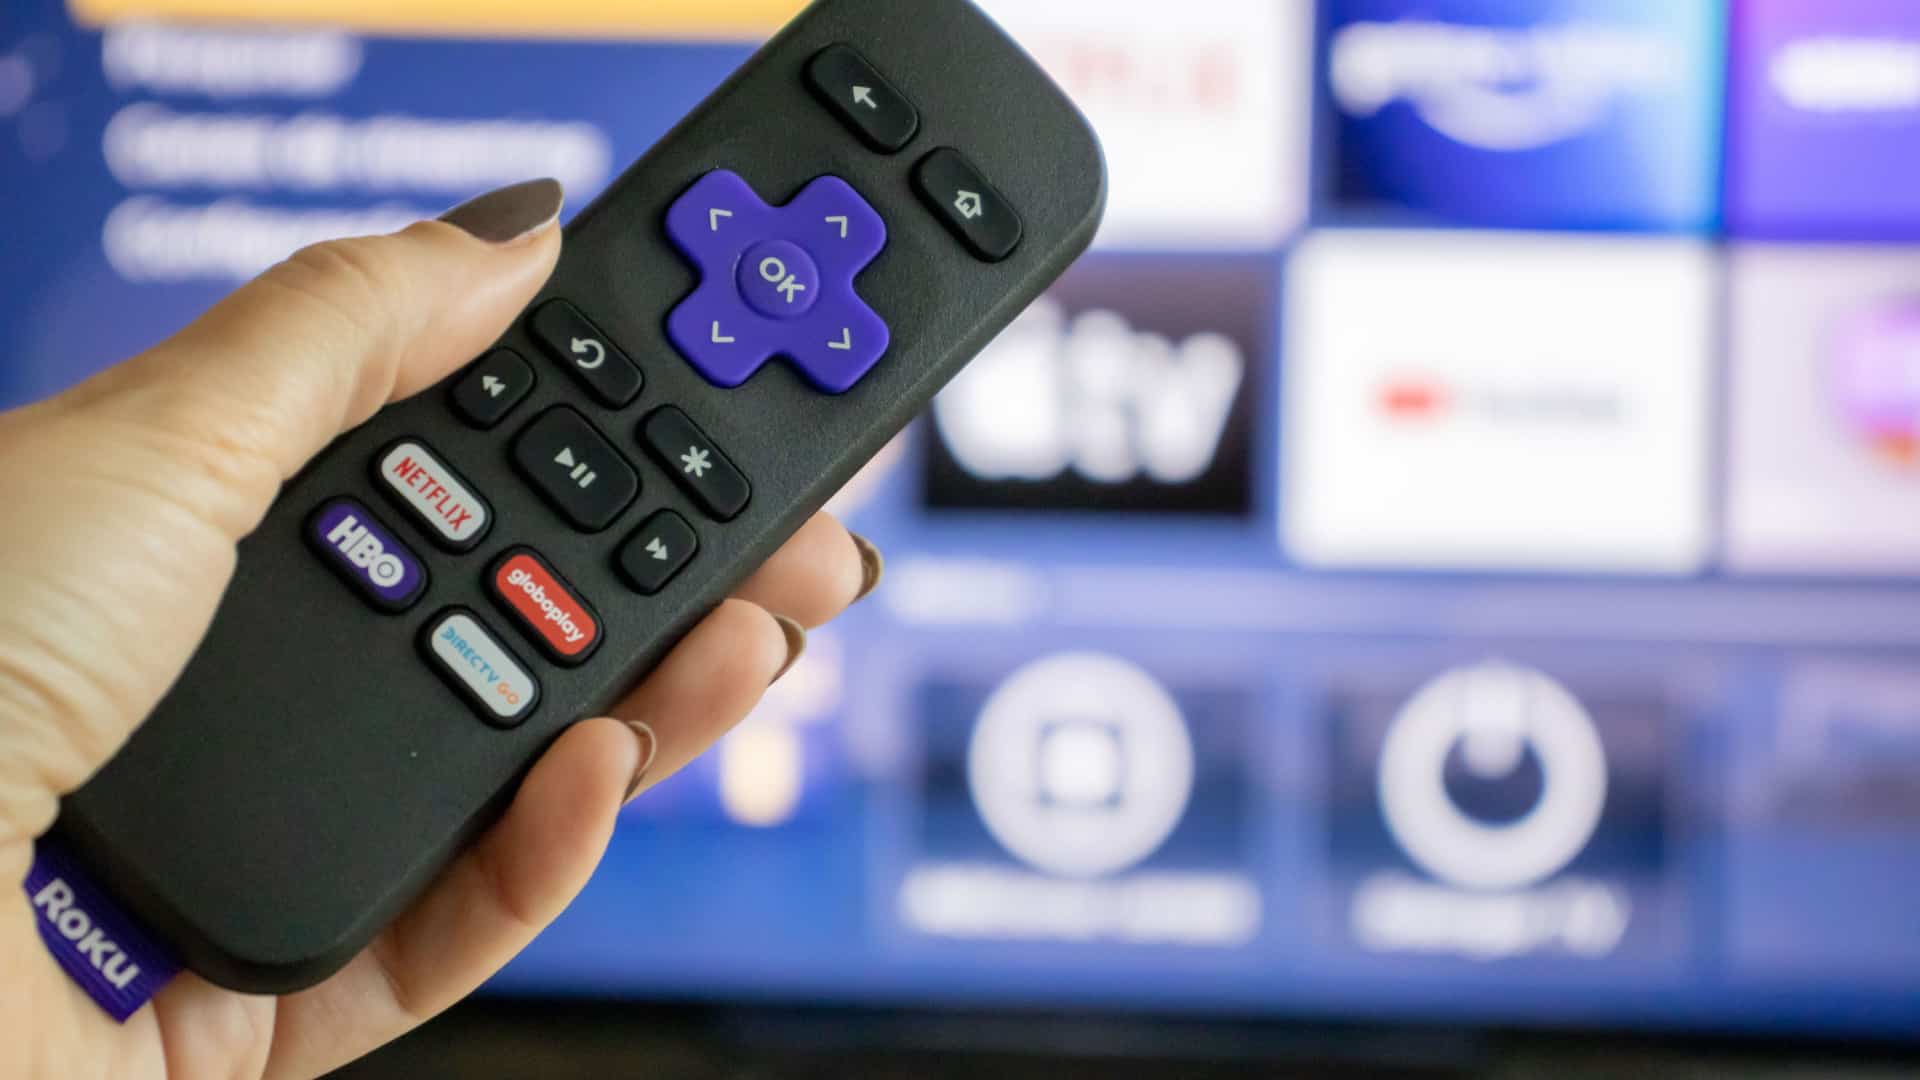 Microsoft’s integration with Roku reveals increased engagement across CTV and search